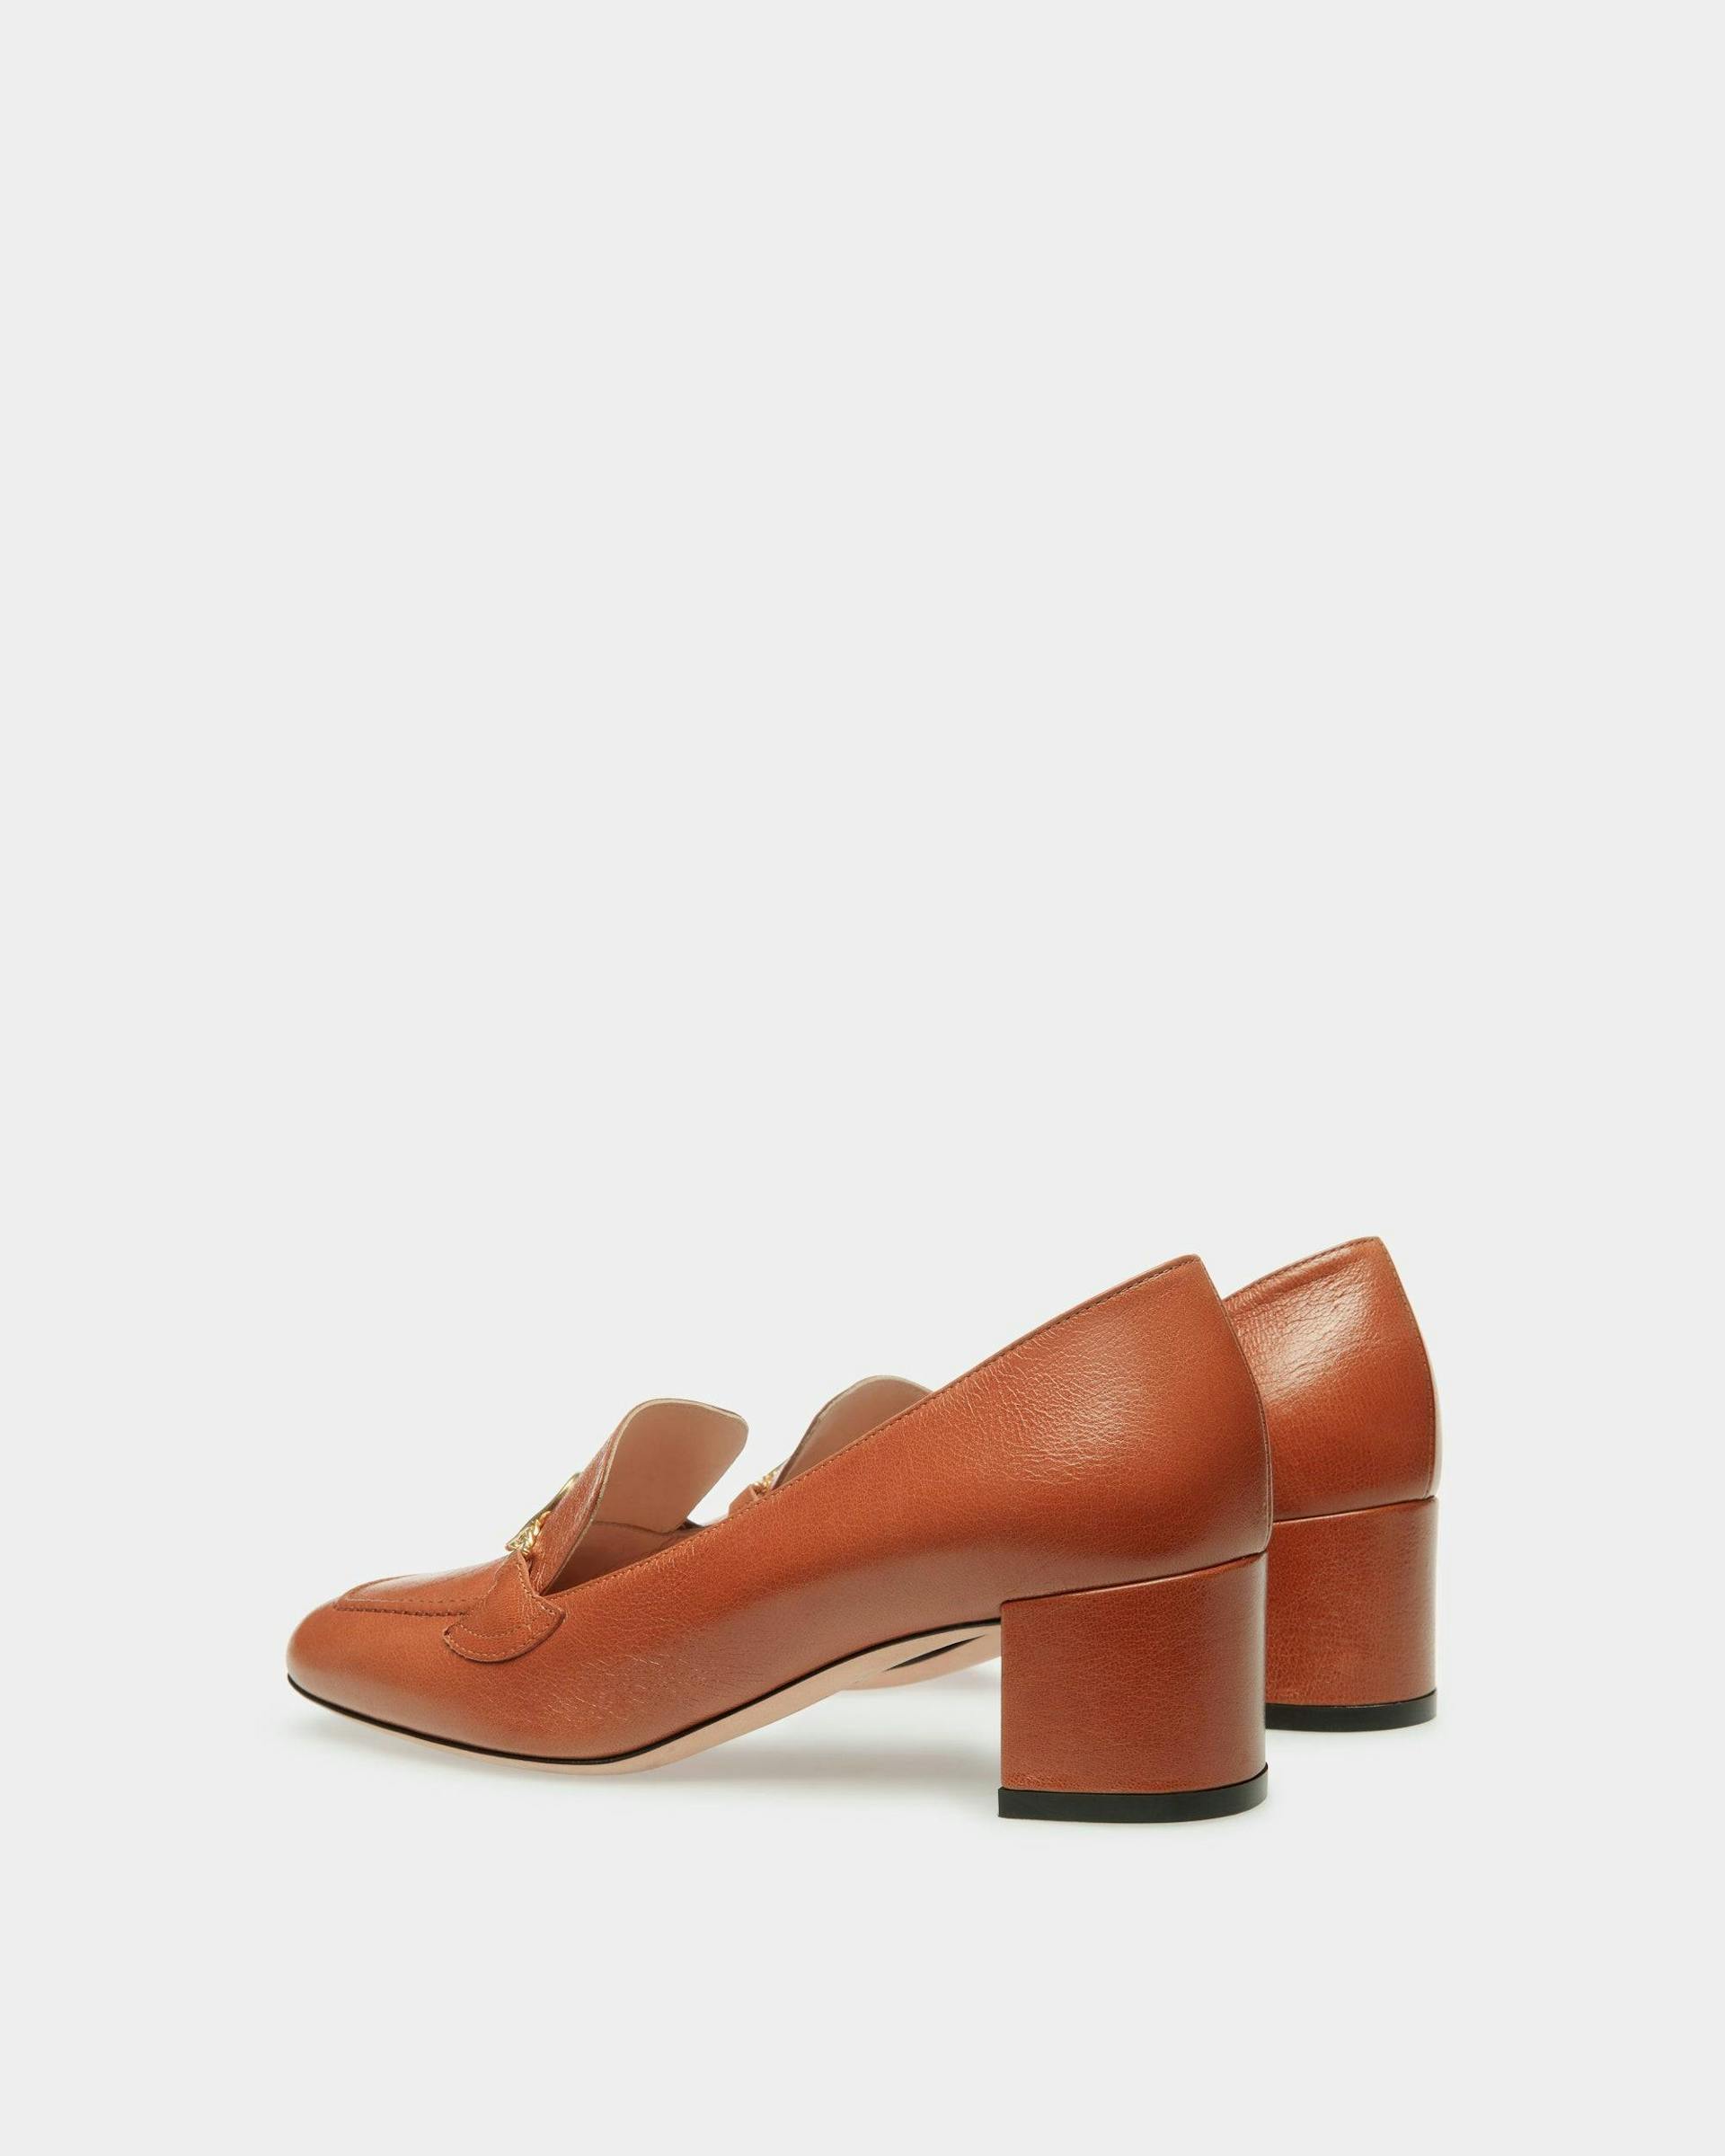 Women's Emblem Pumps In Brown Leather | Bally | Still Life 3/4 Back